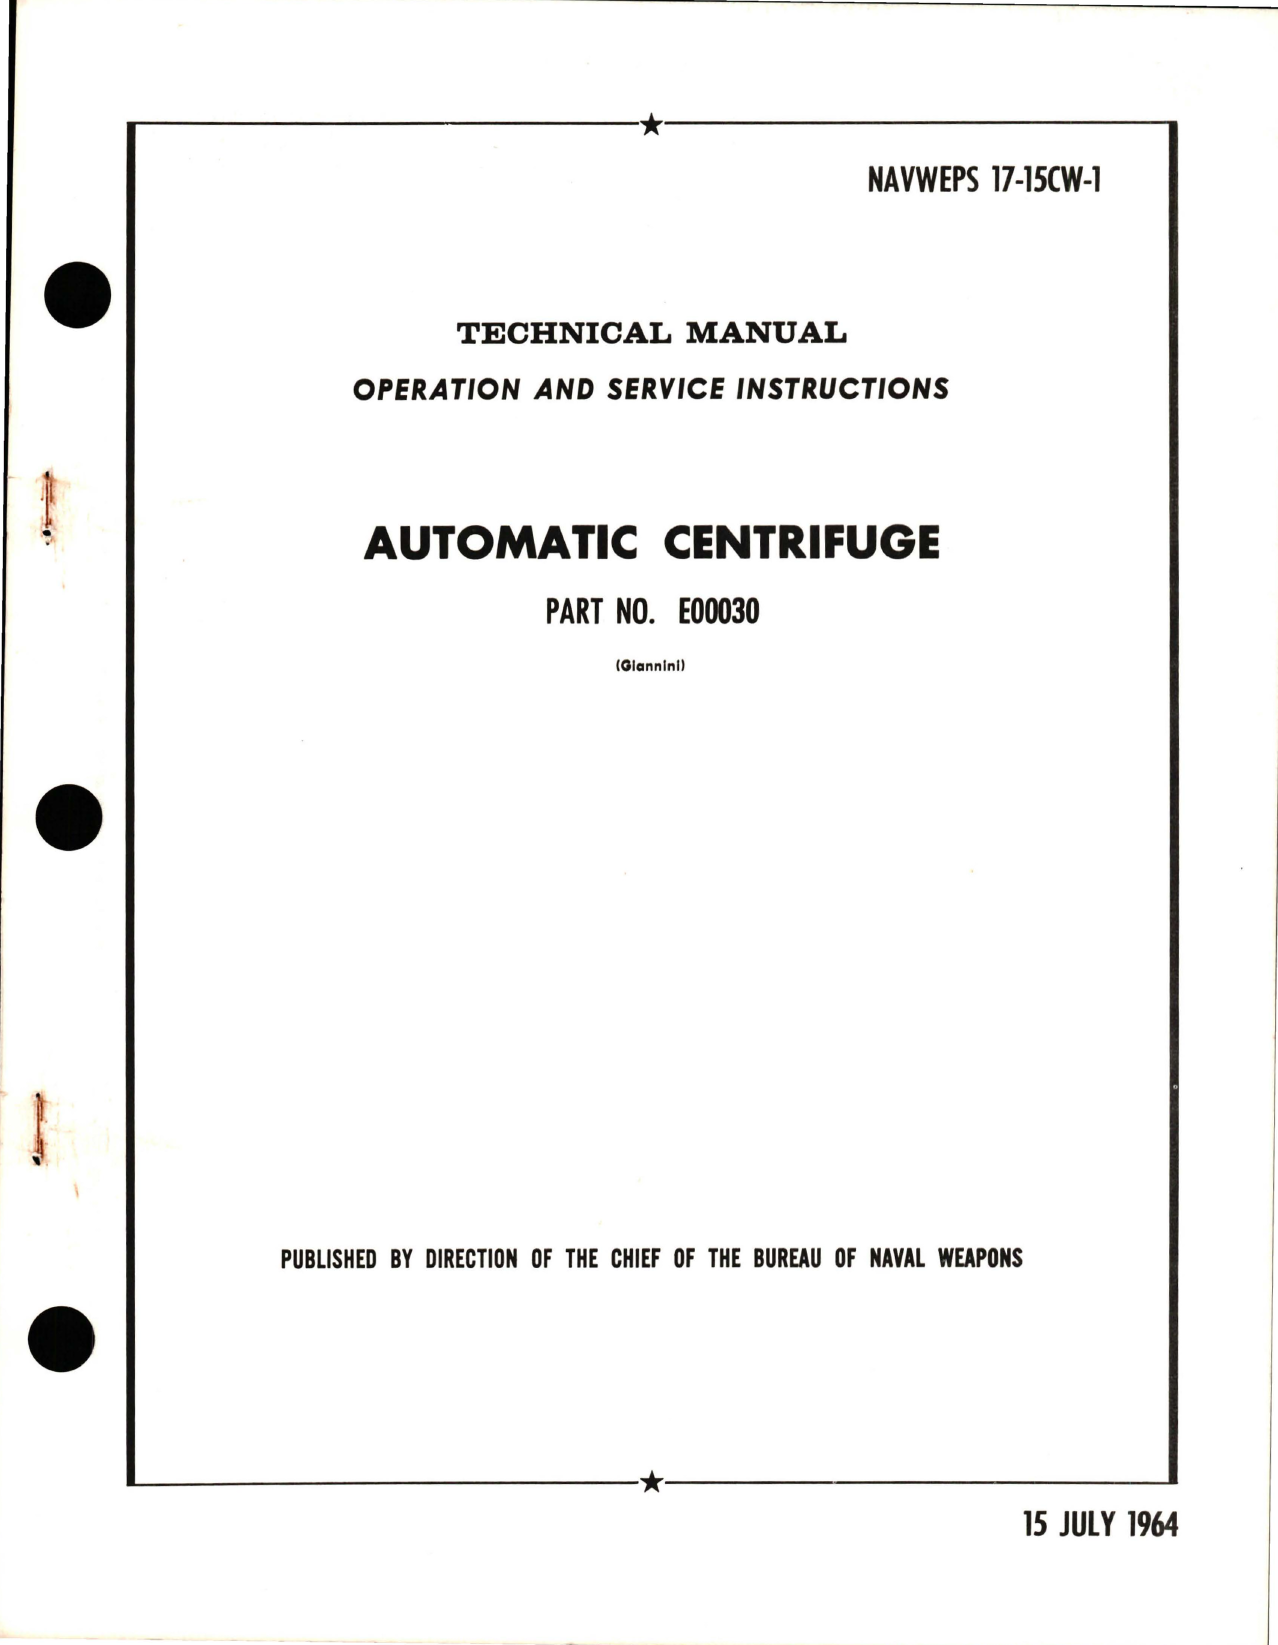 Sample page 1 from AirCorps Library document: Operation, Service Instructions for Automatic Centrifuge - Part E00030 